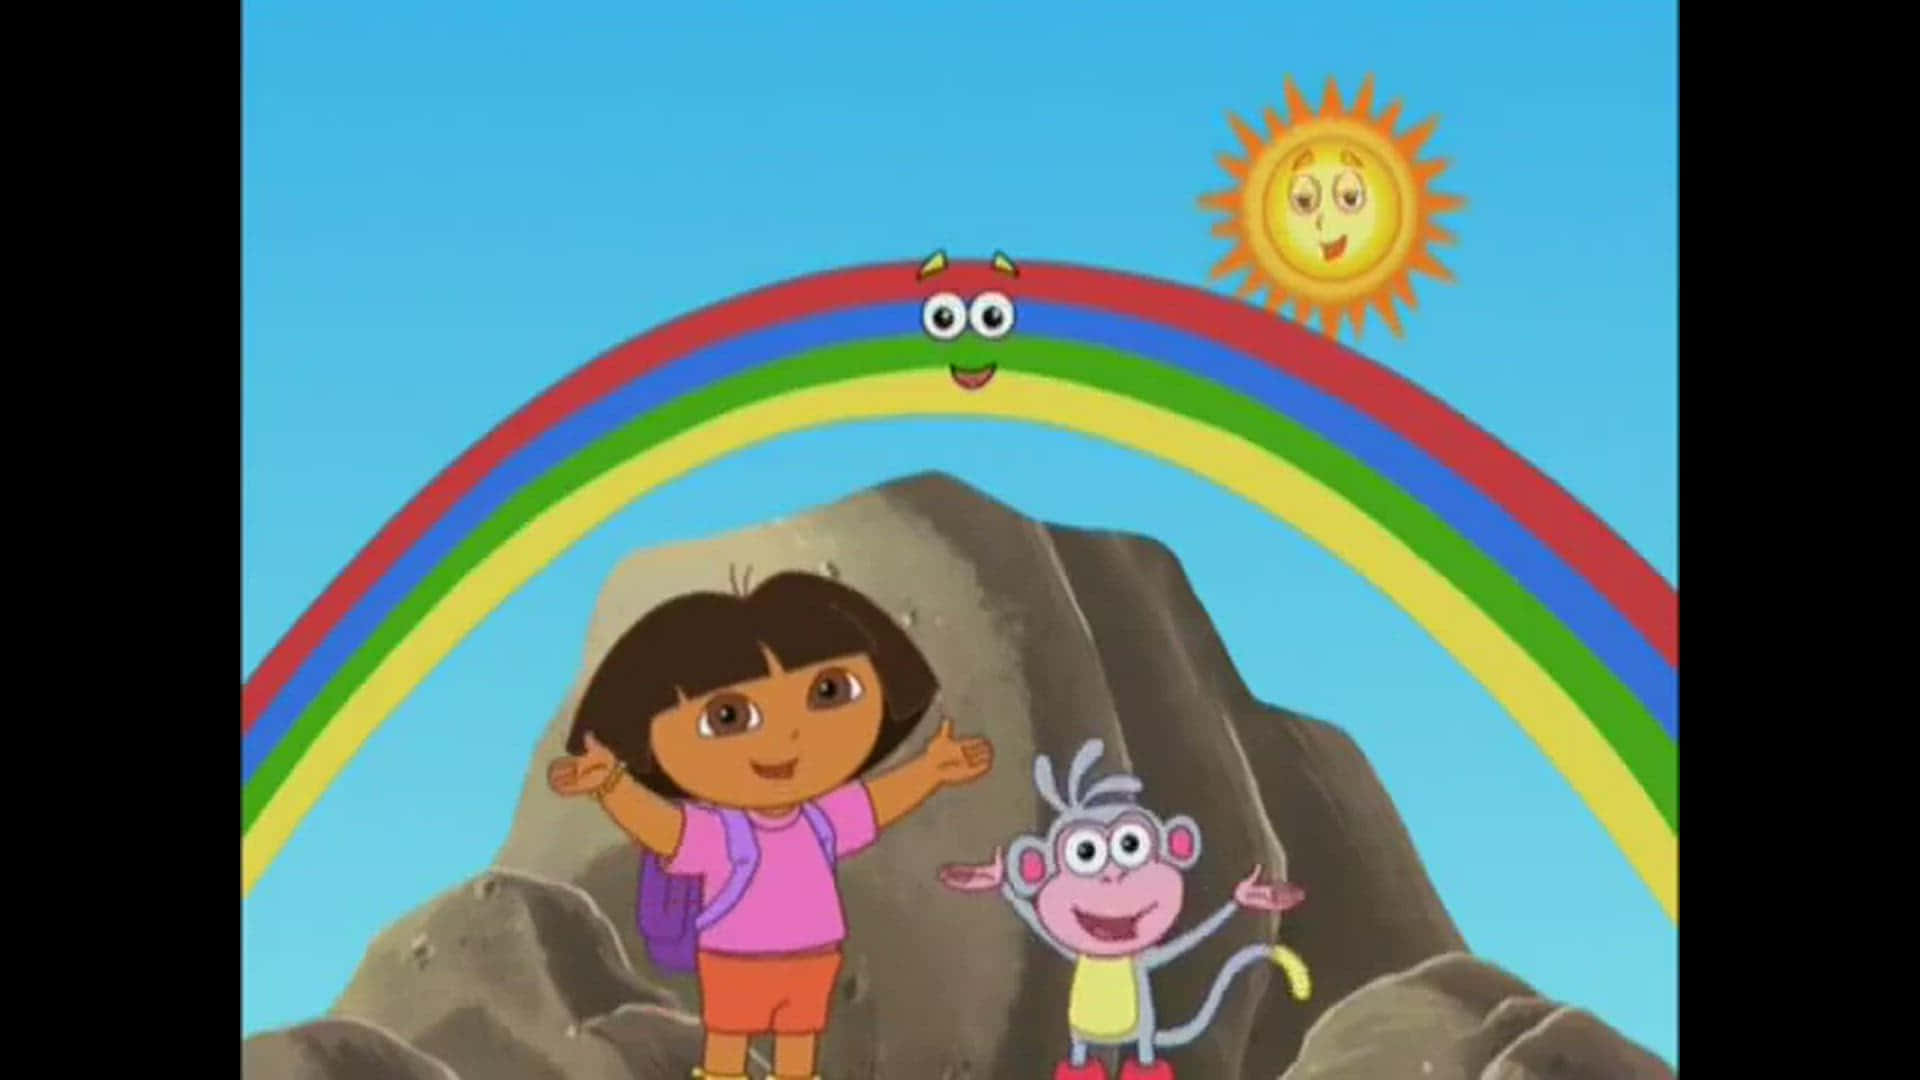 "Fun is just around the corner with Funny Dora!" Wallpaper